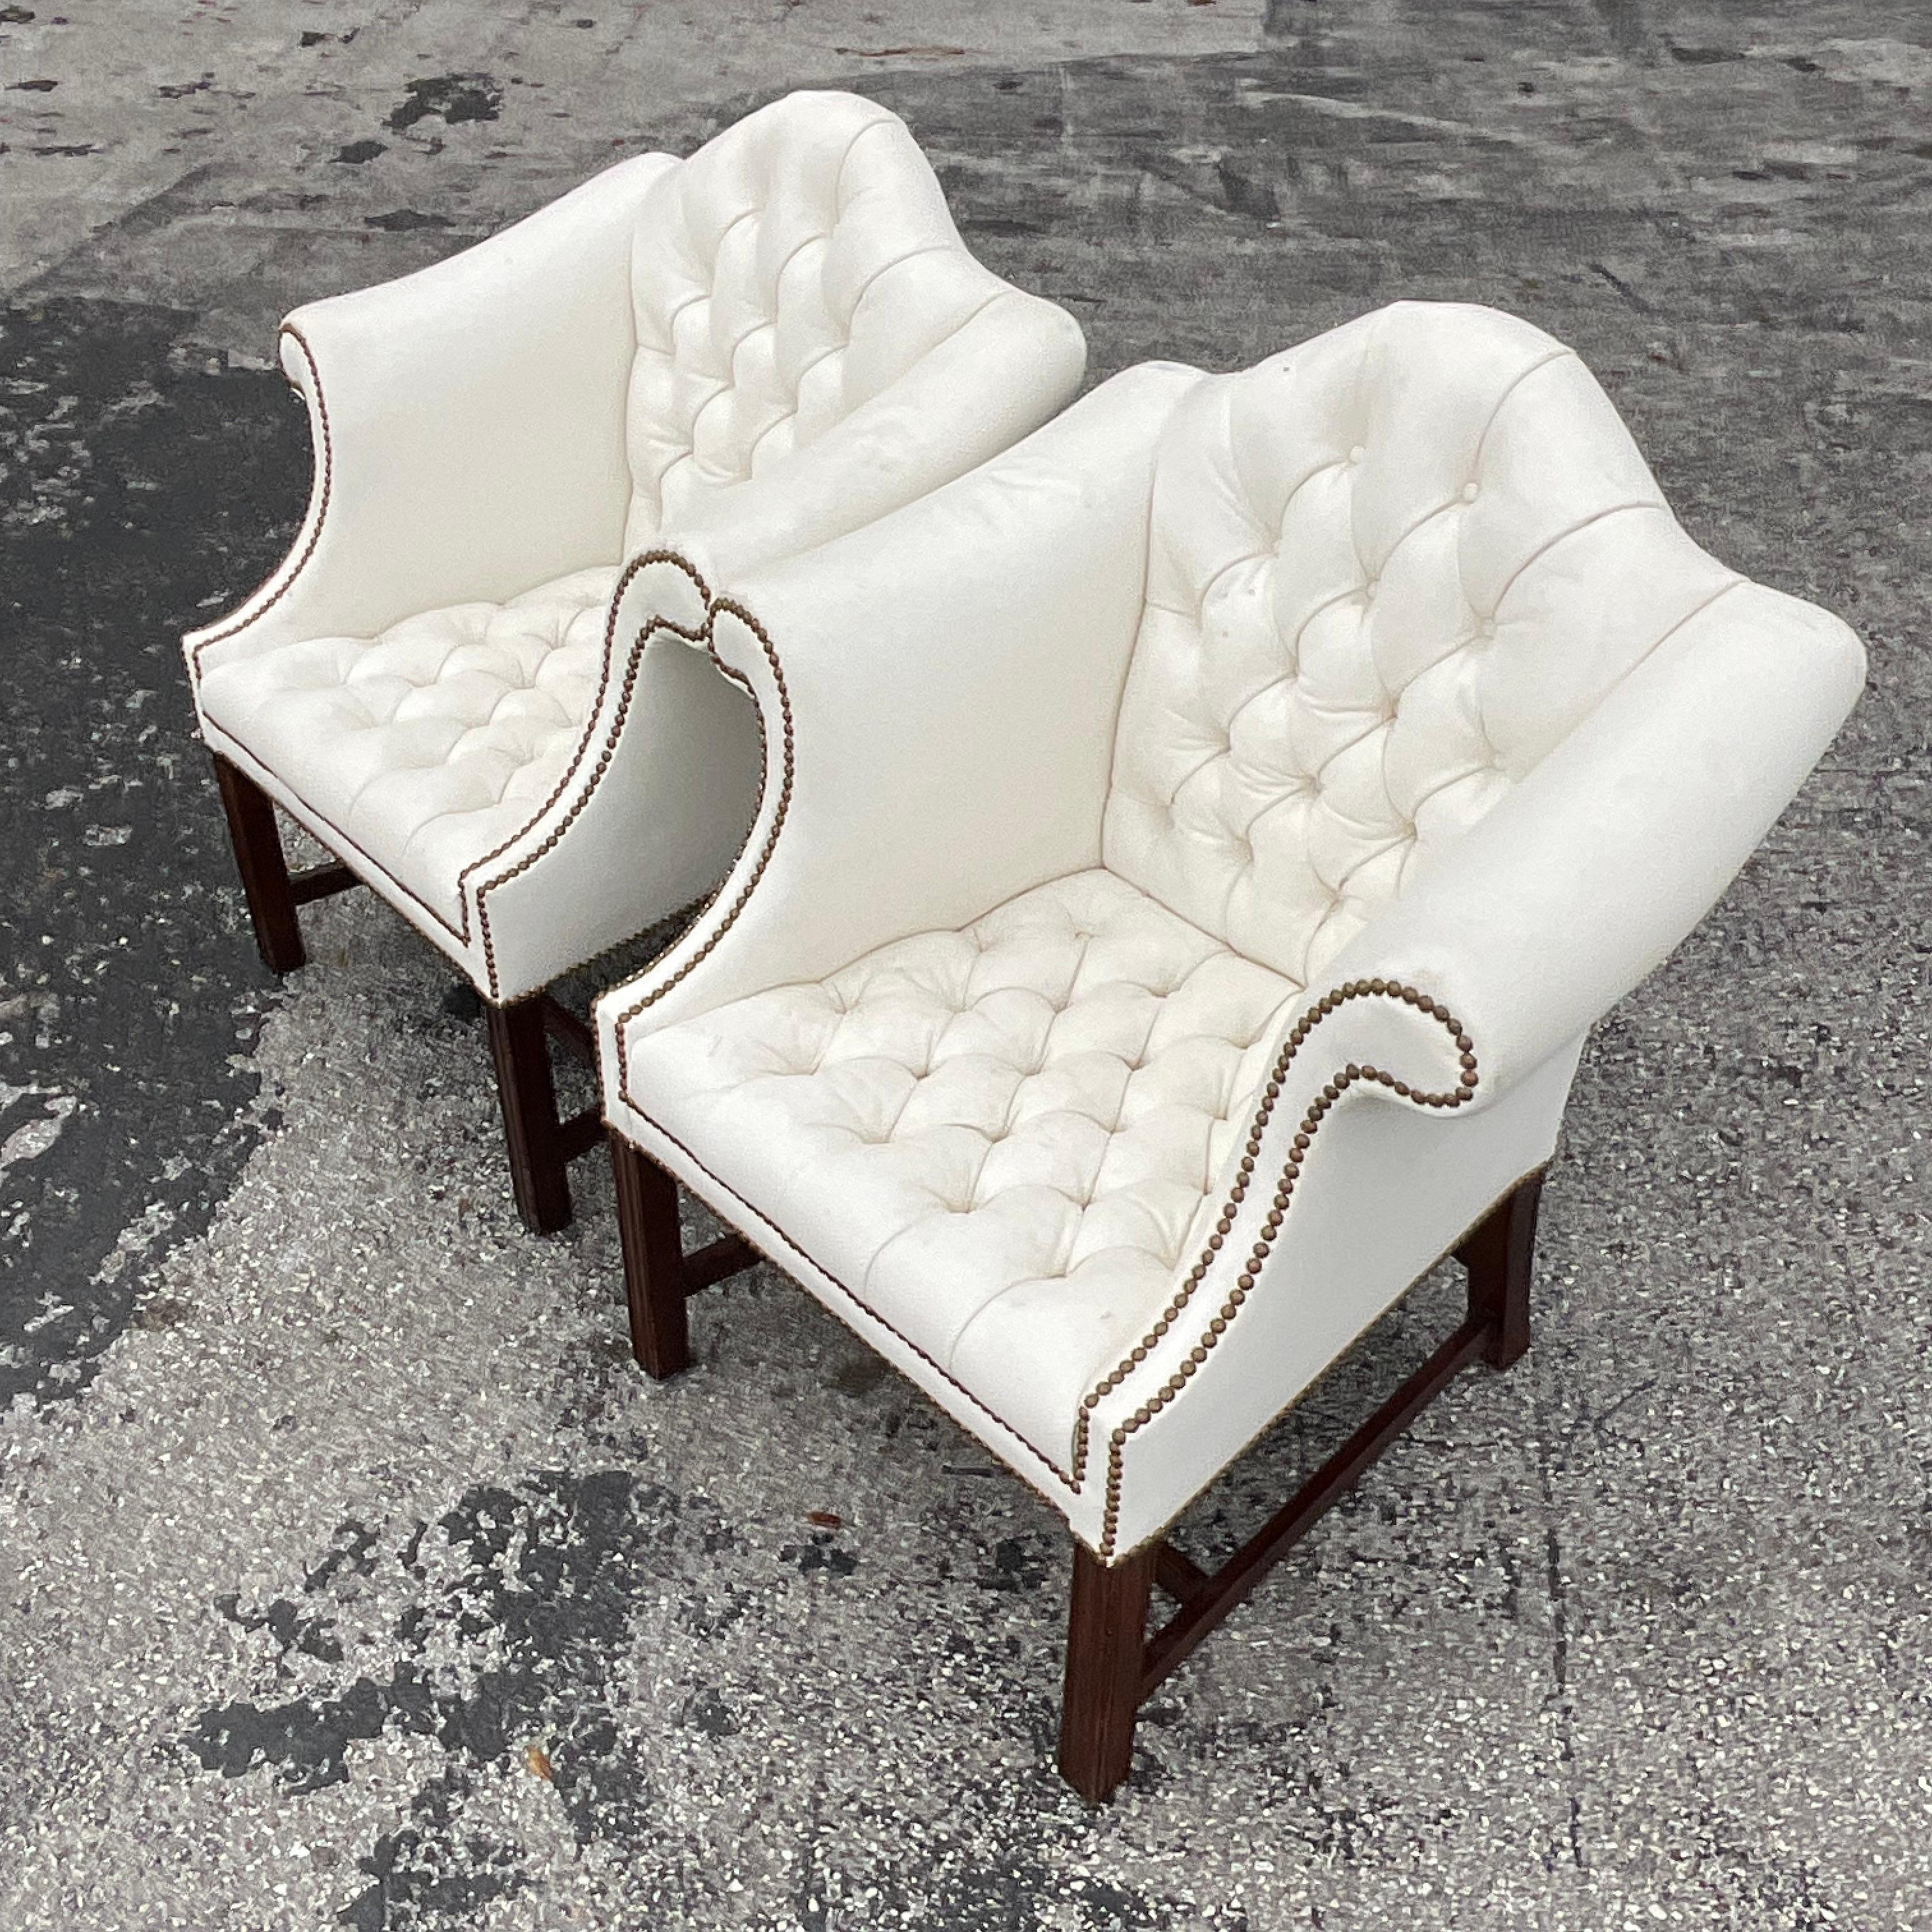 Vintage Traditional Camel Back Tufted Leather Arm Chairs - a Pair For Sale 1